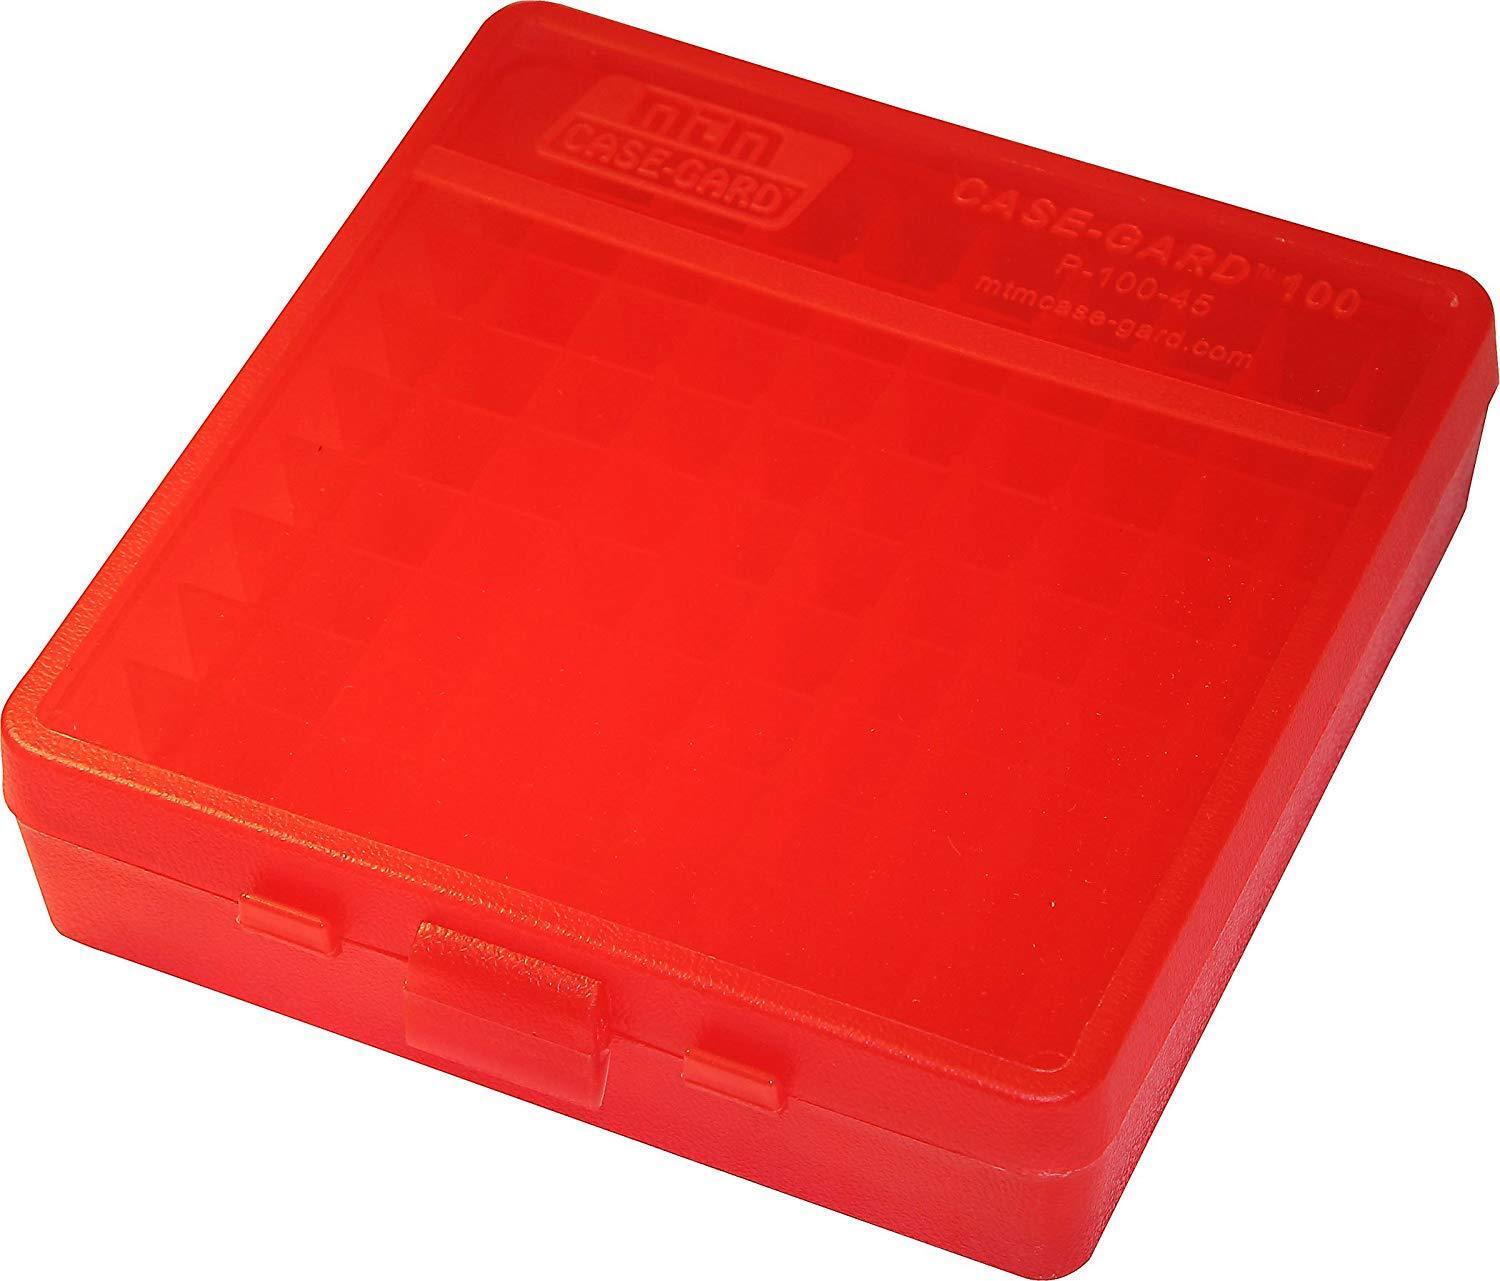 40 S&W/45 ACP Ammo Box Clear Red 100 Round (Quantity 5) Free Shipping (MTM)